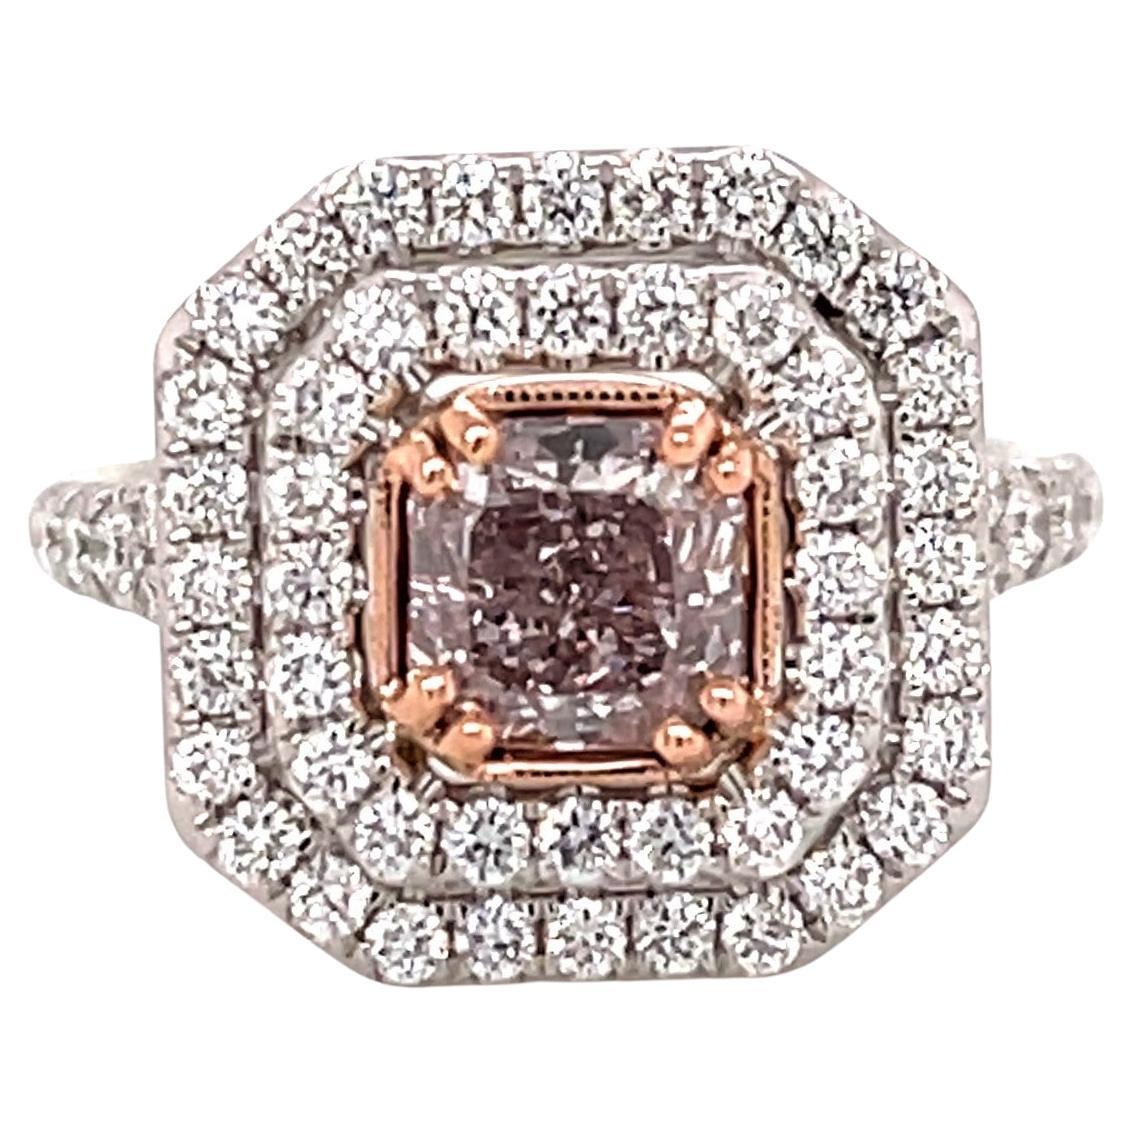 1.82 Cts Natural Fancy Pink Diamond Ring